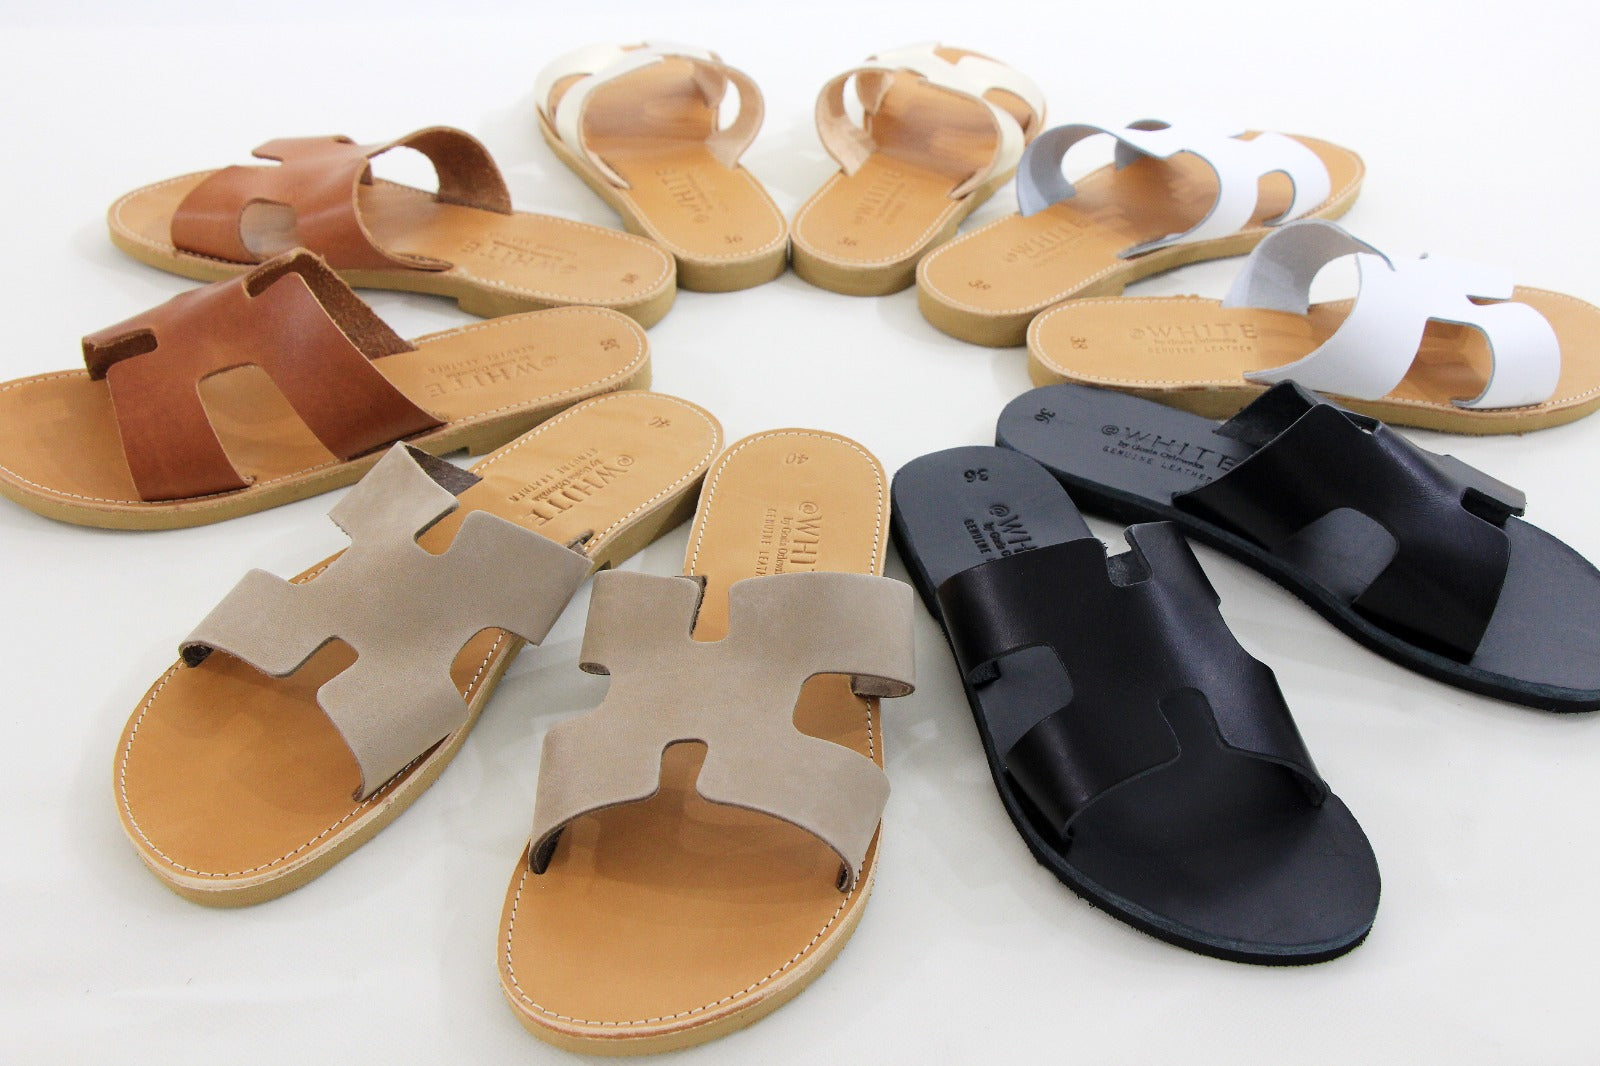 @WHITE / Roma leather sandals